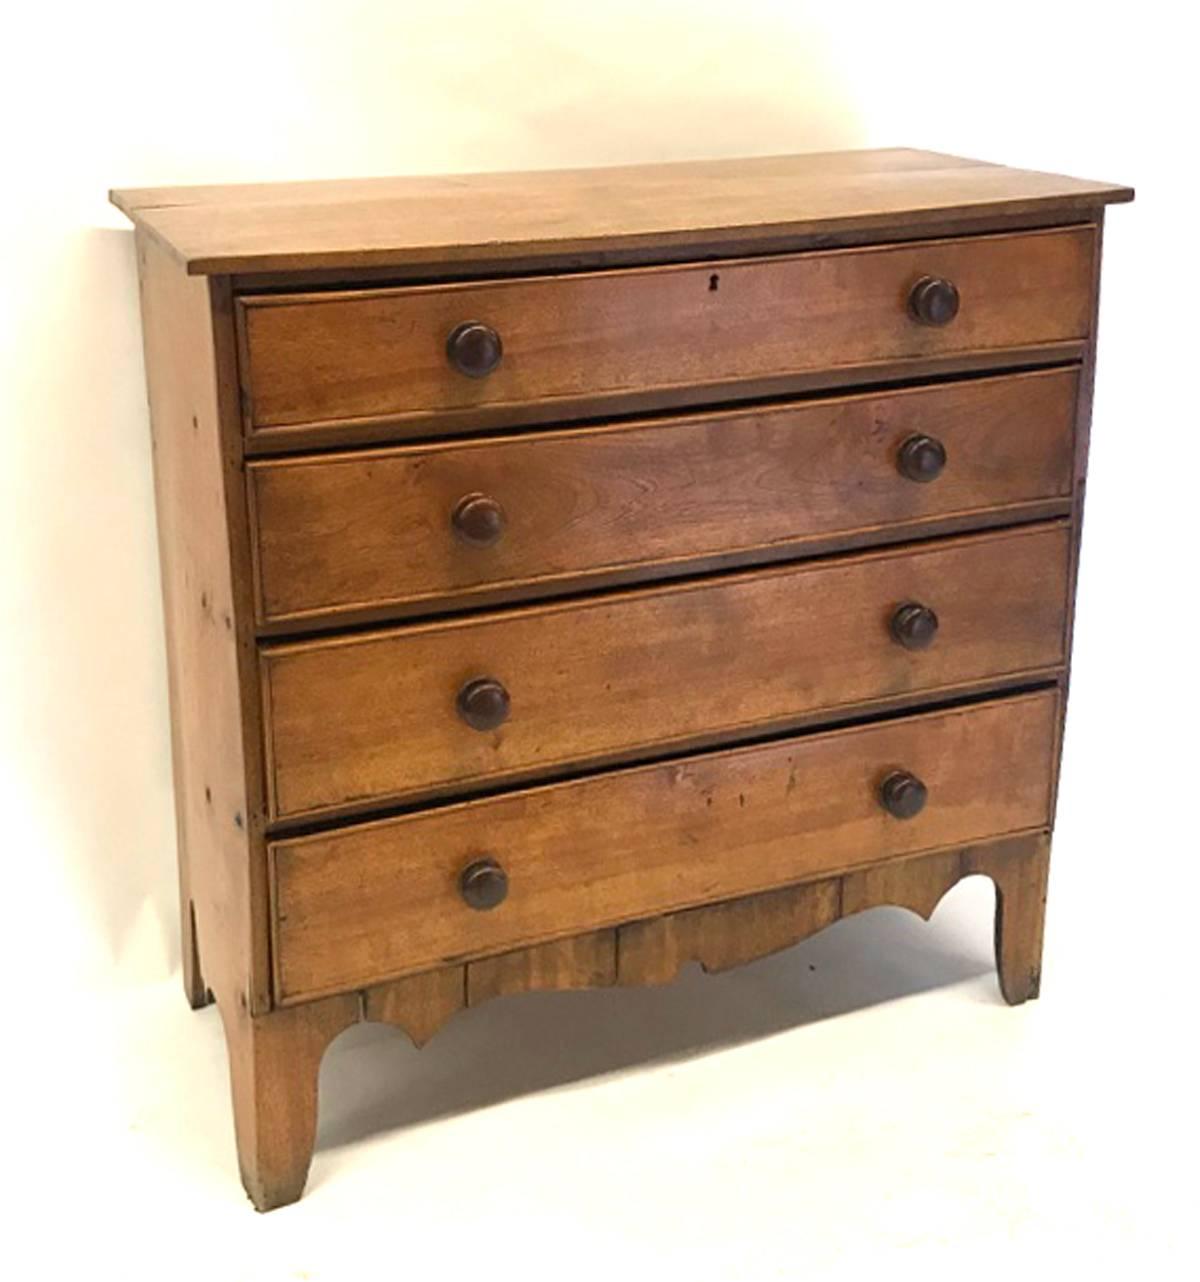 19th century New England four graduated, banded drawer chest in Maple. Flat front. The secondary wood is pine.
Original knobs, old repairs. One wide board on top. Beautiful honey color. Condition commensurate with age. Some bowing on the sides.